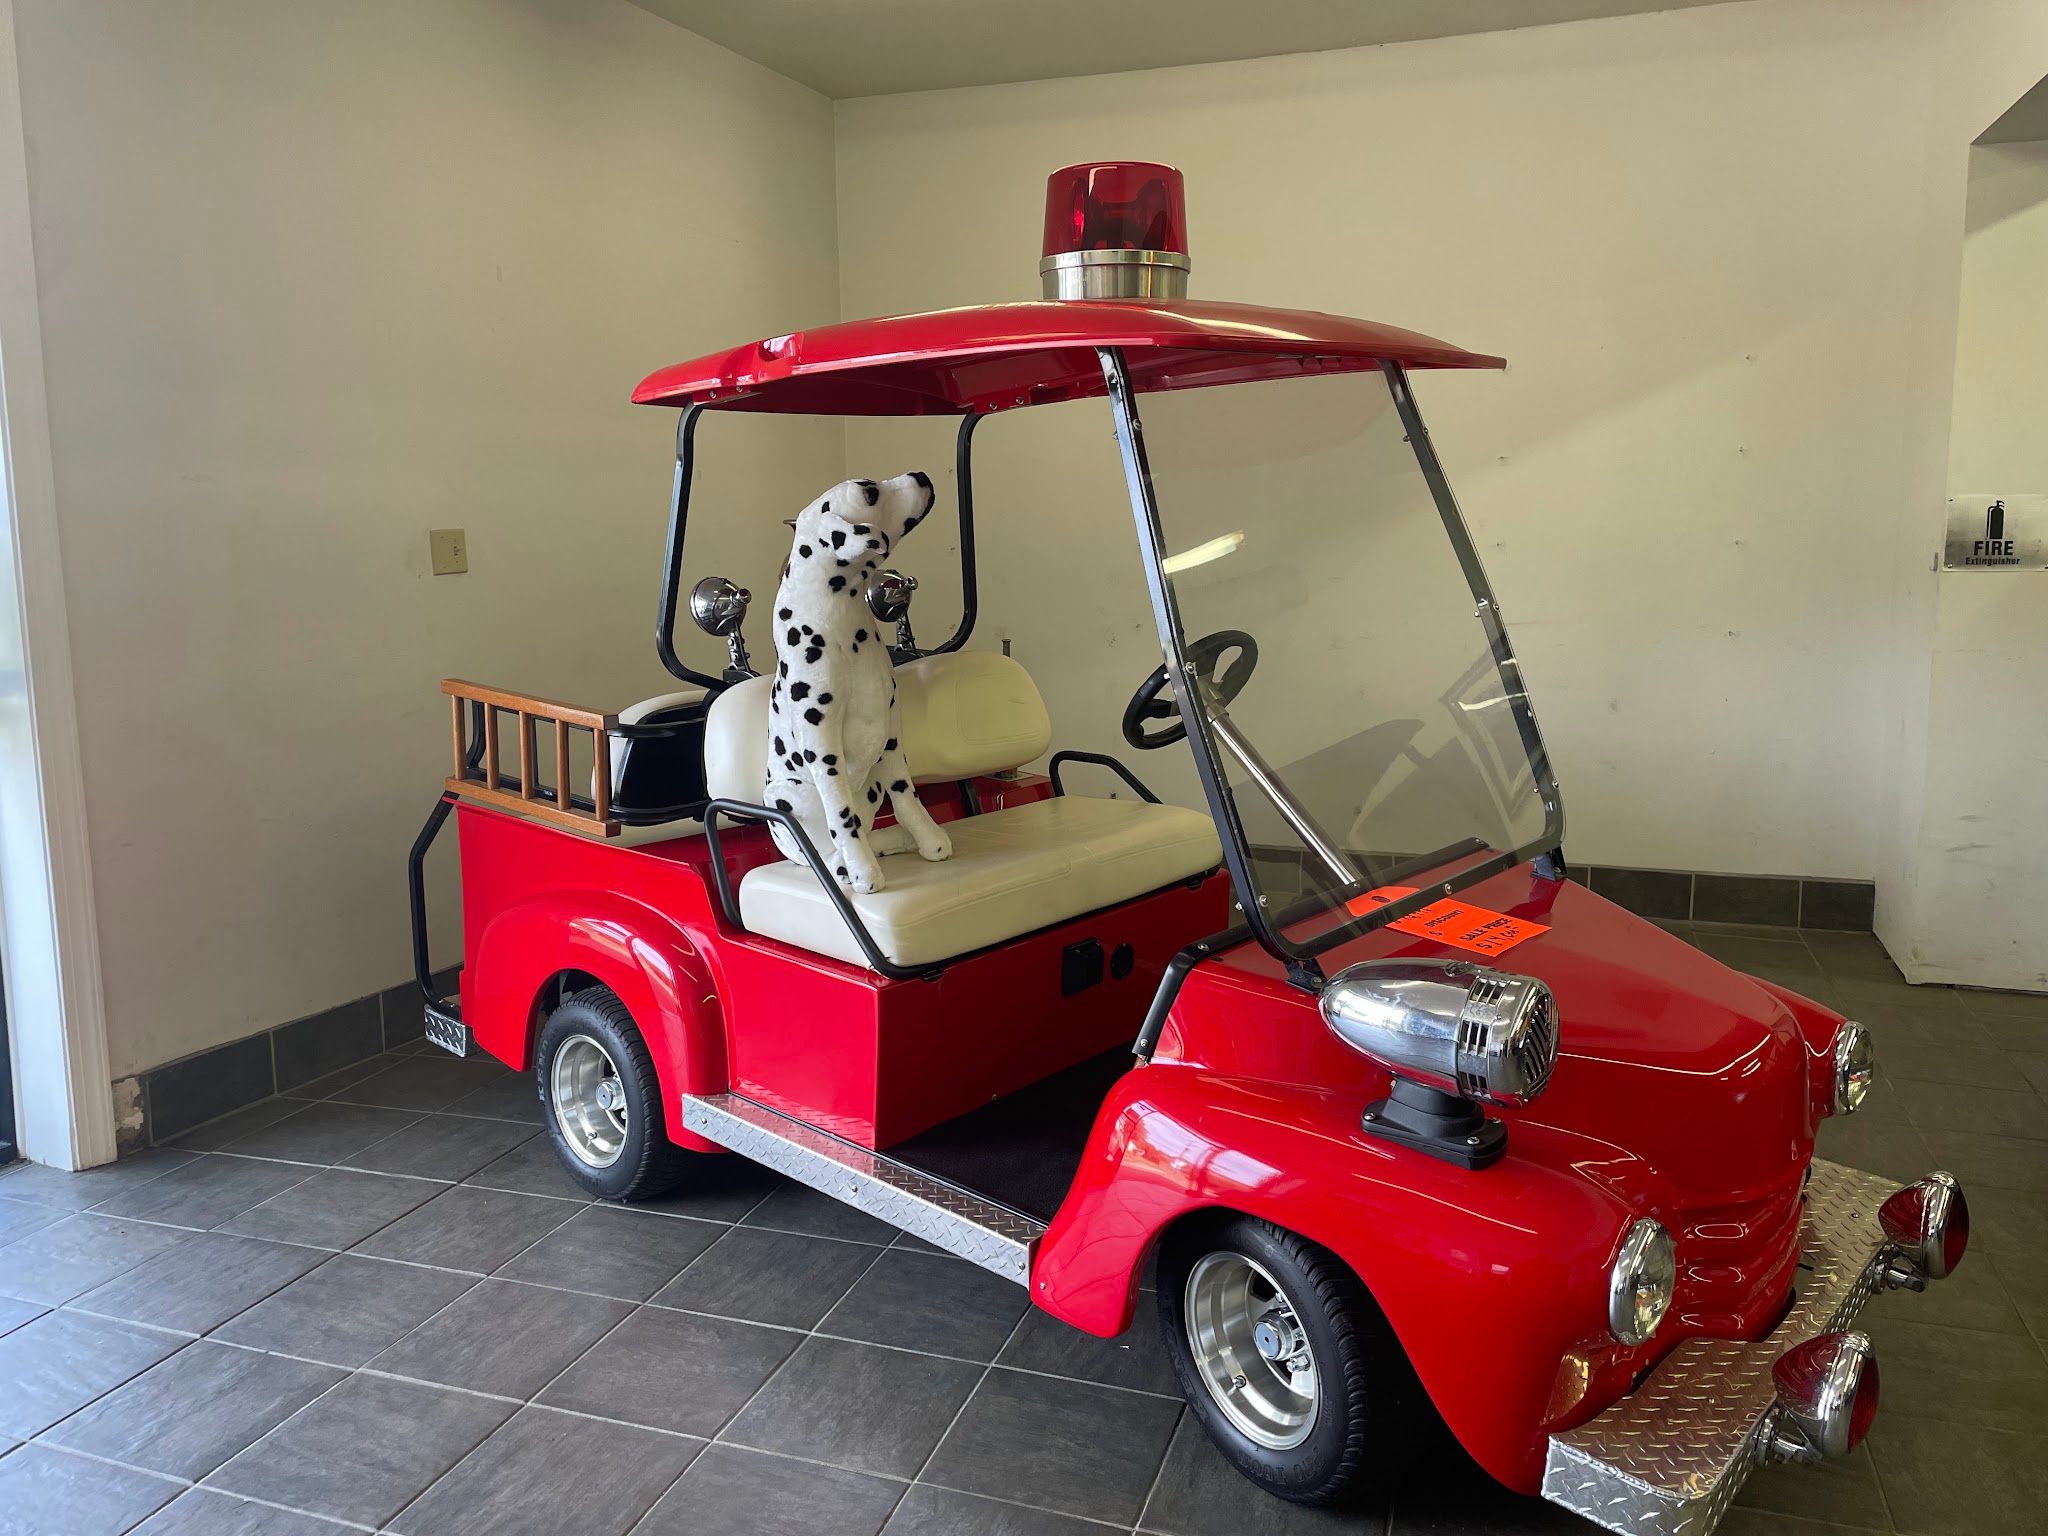 VIRGINIA GOLF CARS AND BATTERIES